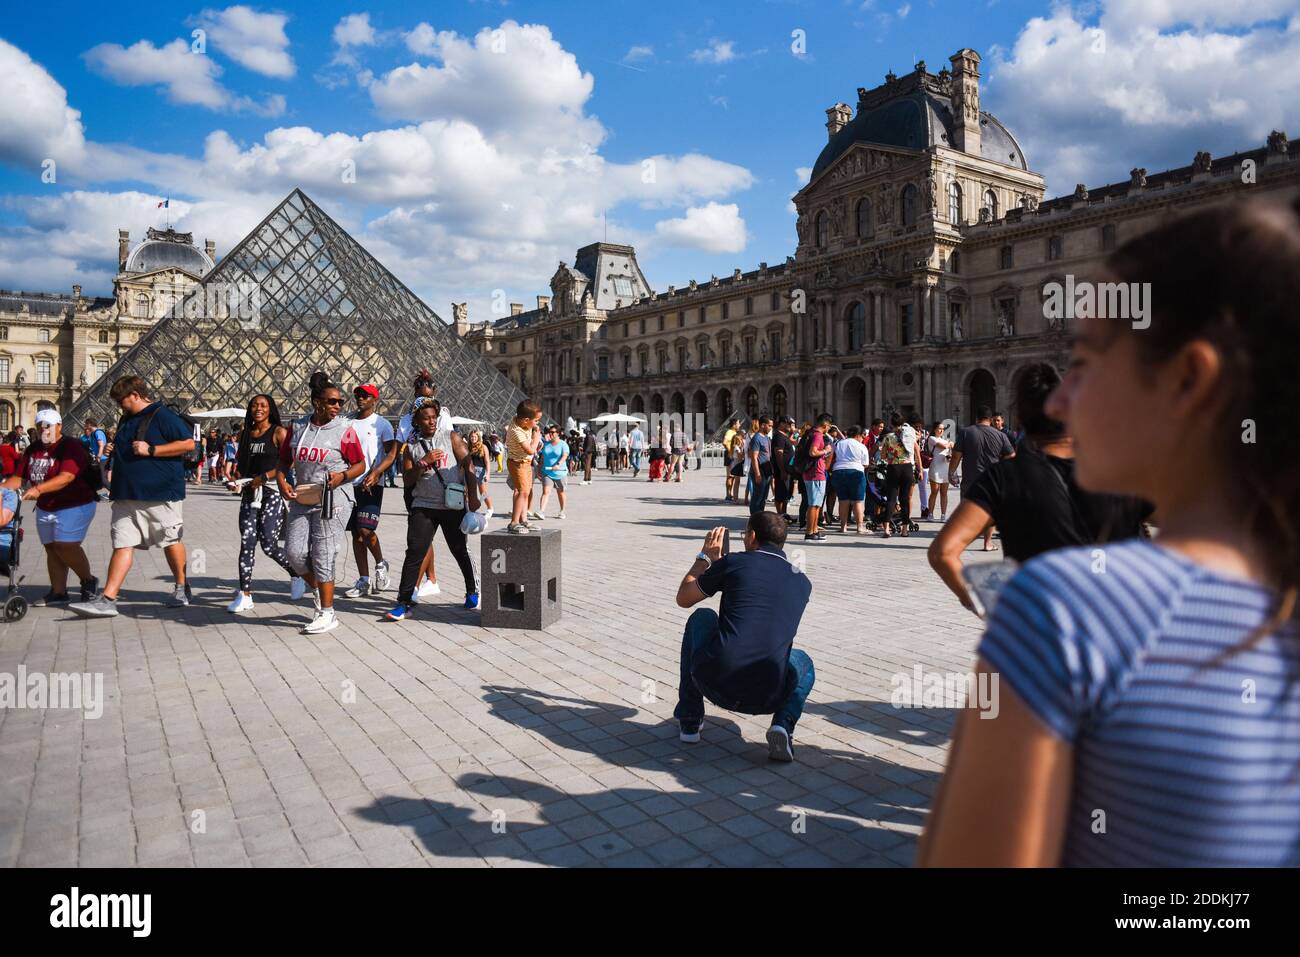 Tourists walk in front of the Louvre on July 31 2019 in Paris, France.  Anyone planning a visit to Paris' Louvre museum has been warned to book in  advance - as the